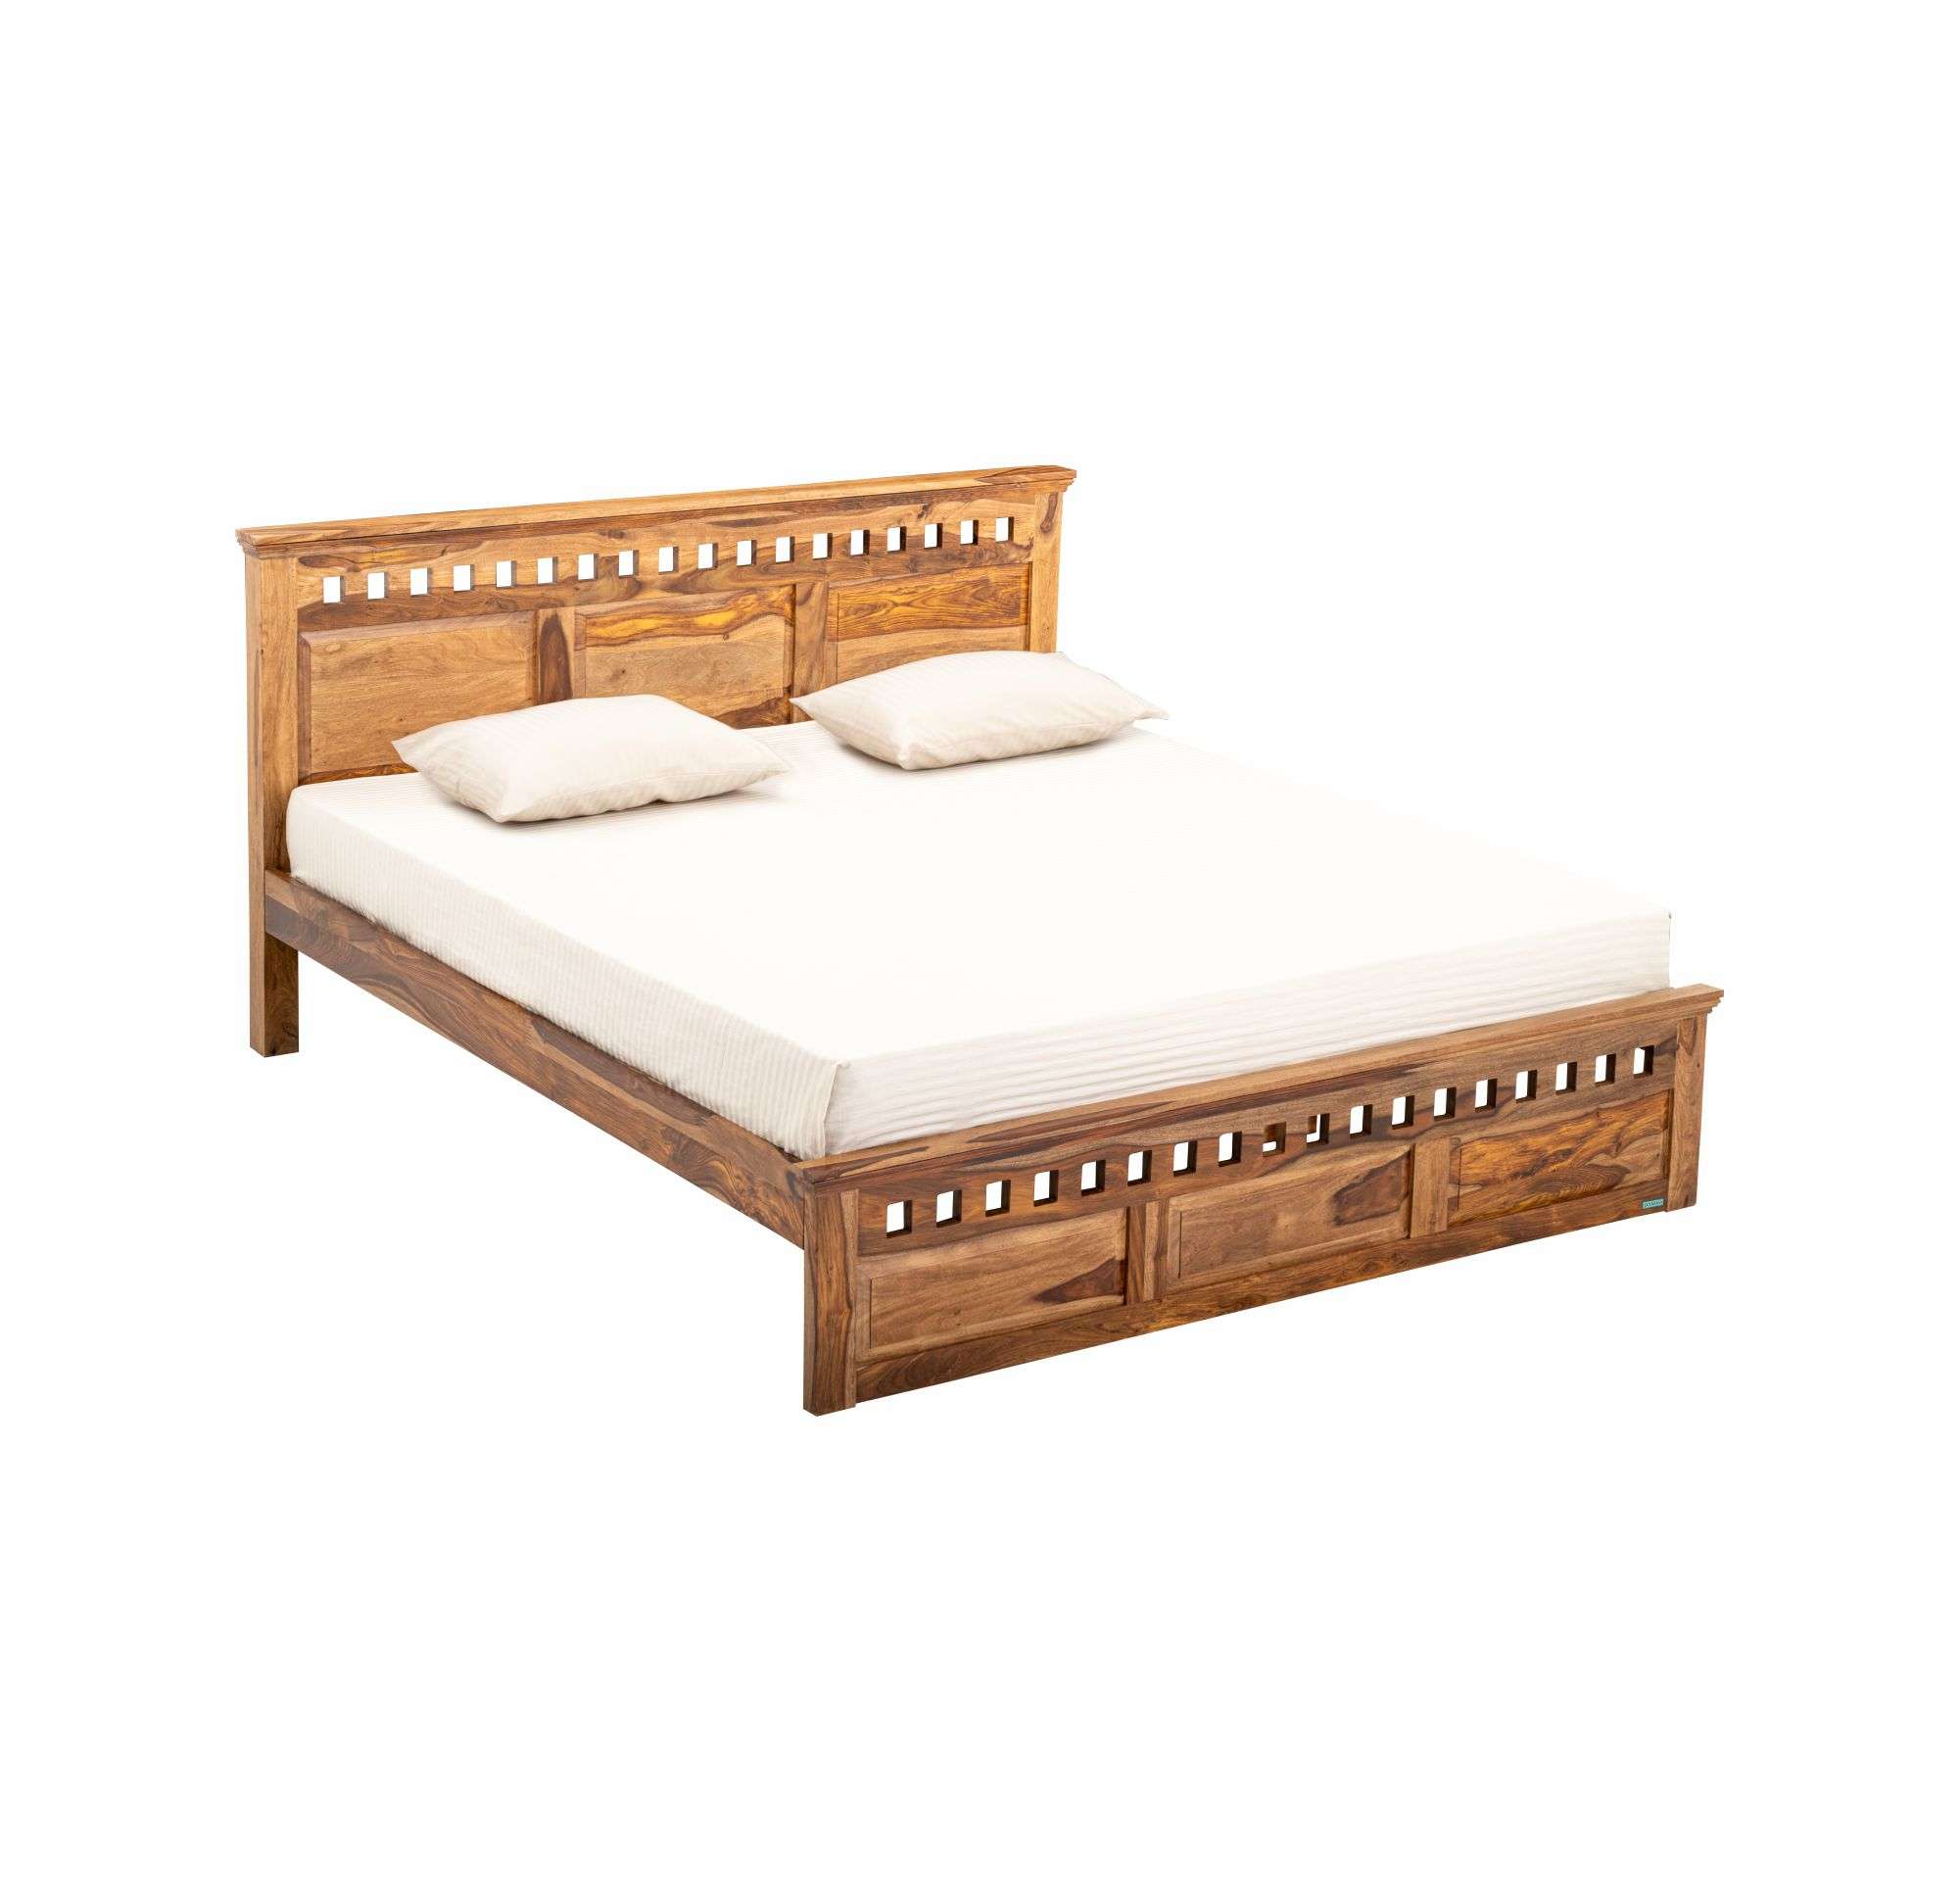 LSCWBWA003-Bed Warsaw Queen Size BD220105-Honey Natural